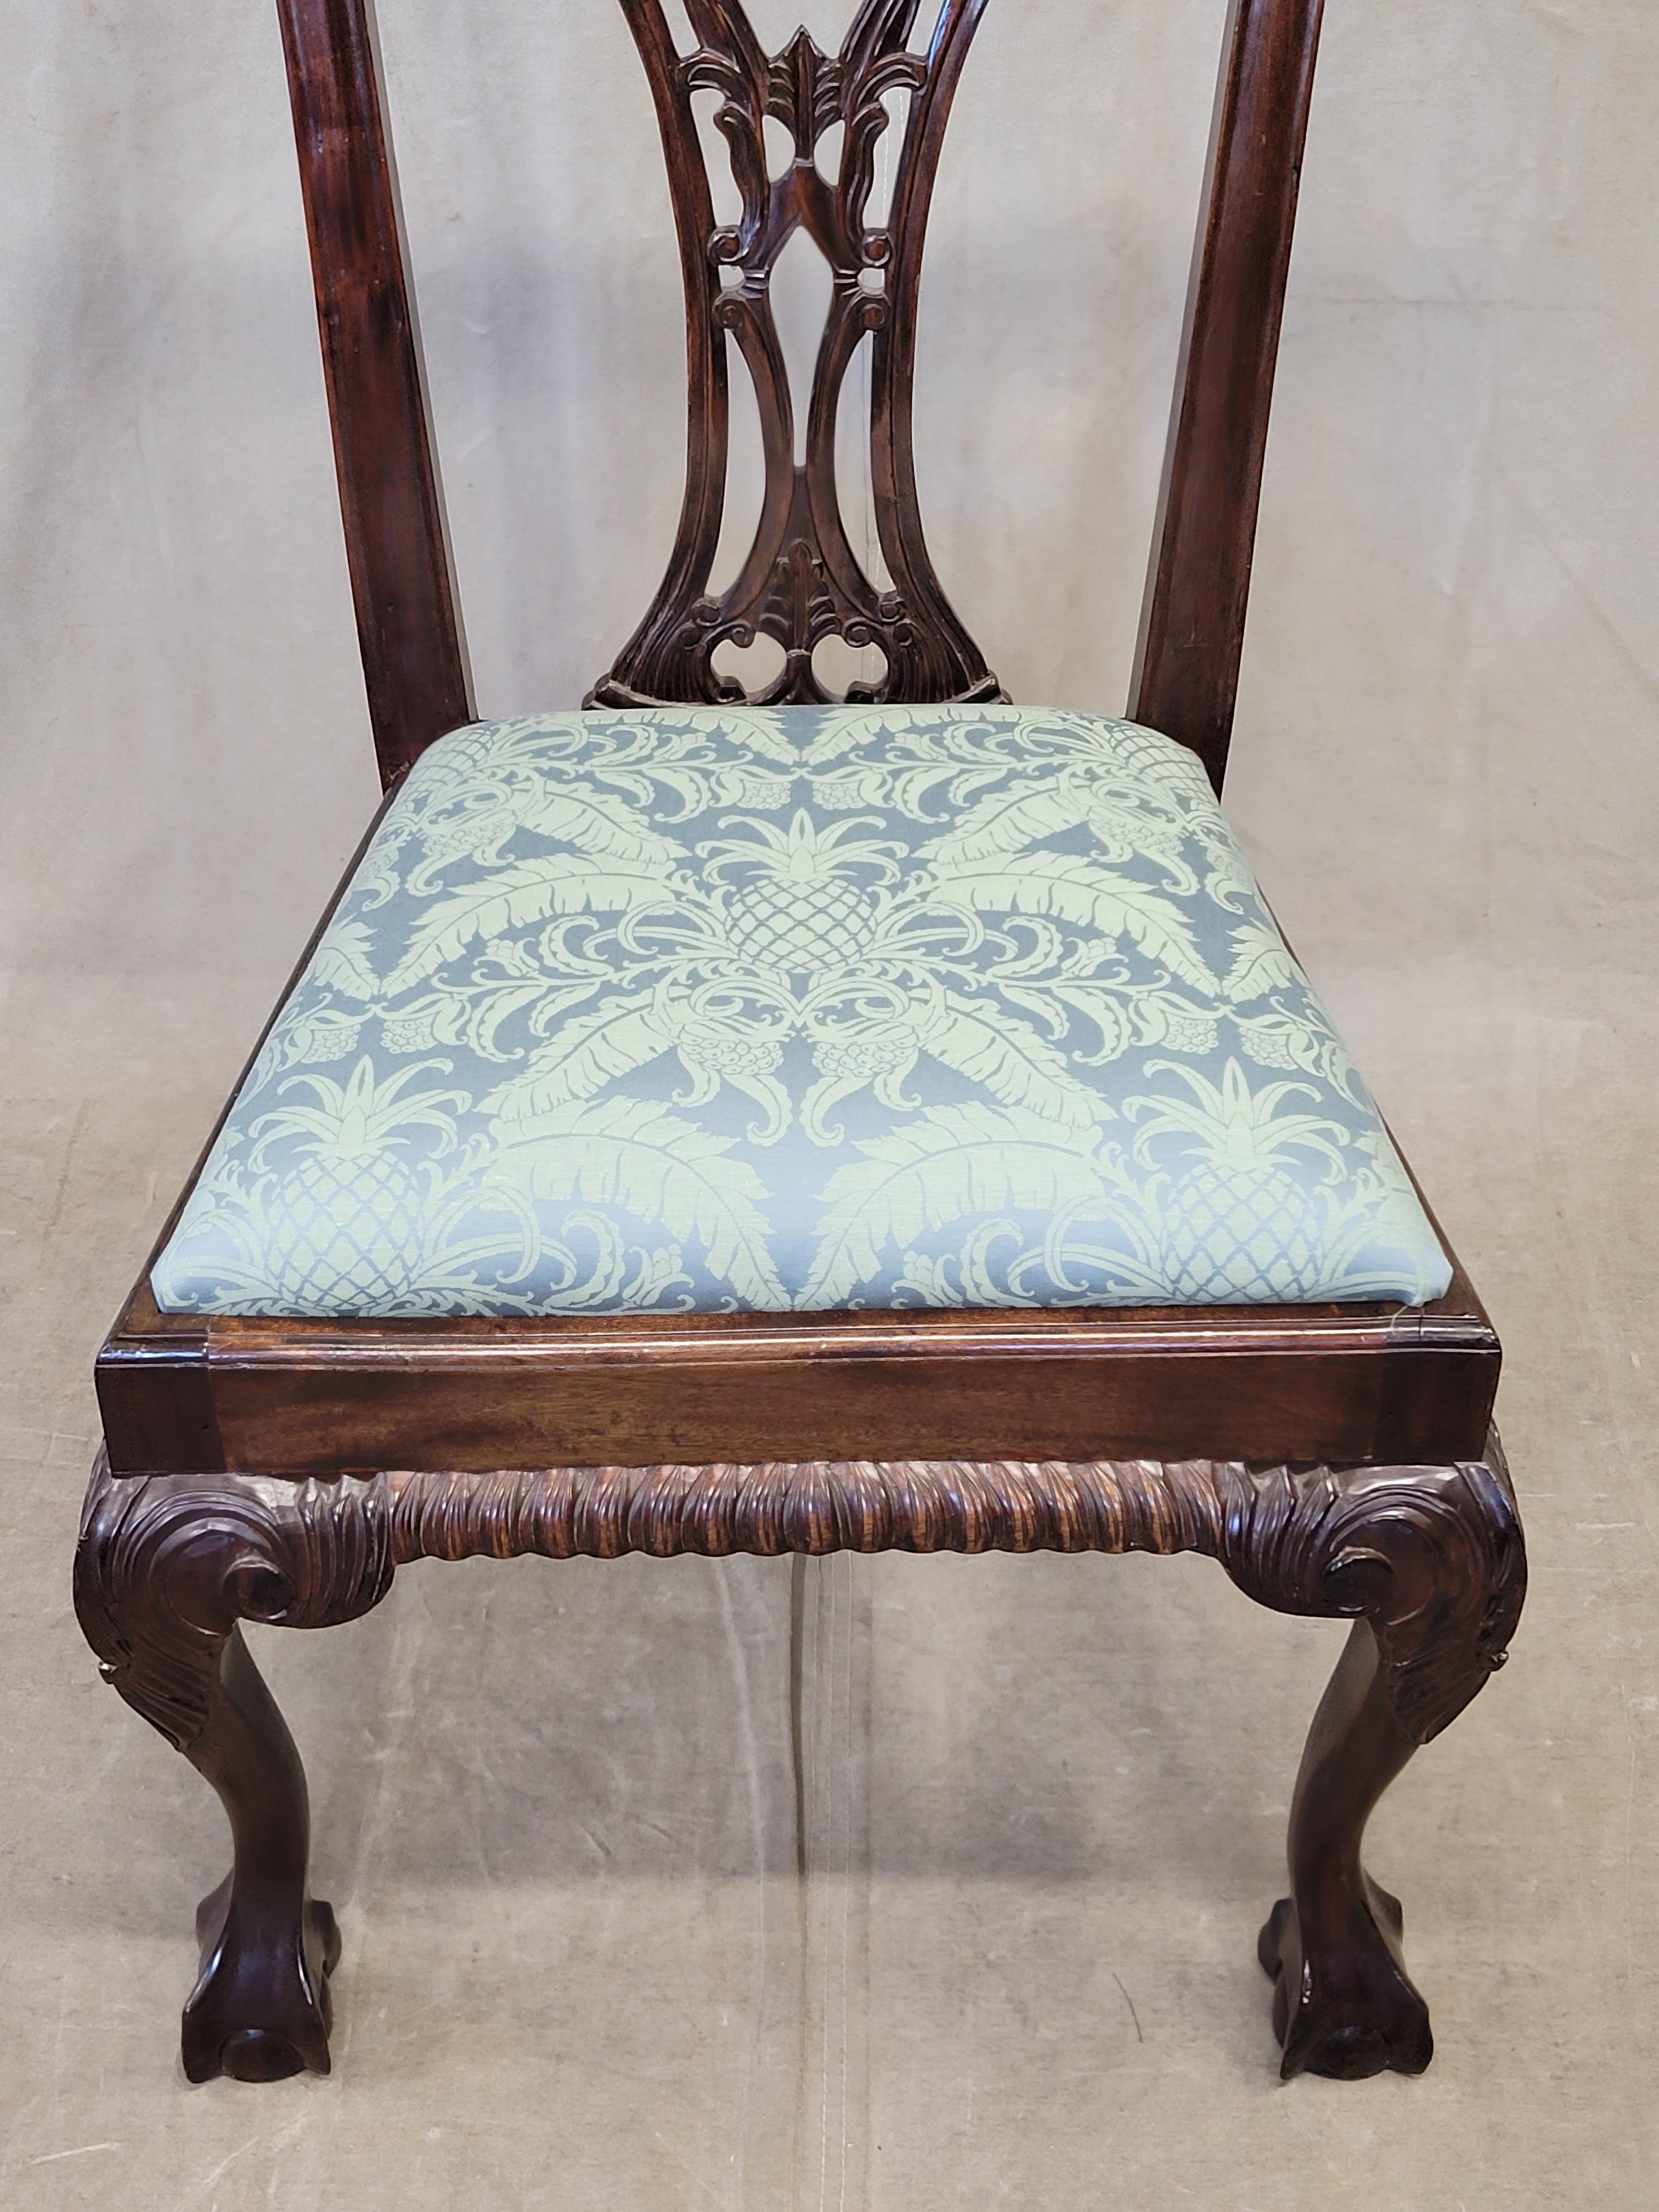 Hand-Carved Vintage Mahogany Chippendale Dining Chairs With Teal Damask - Set of 6